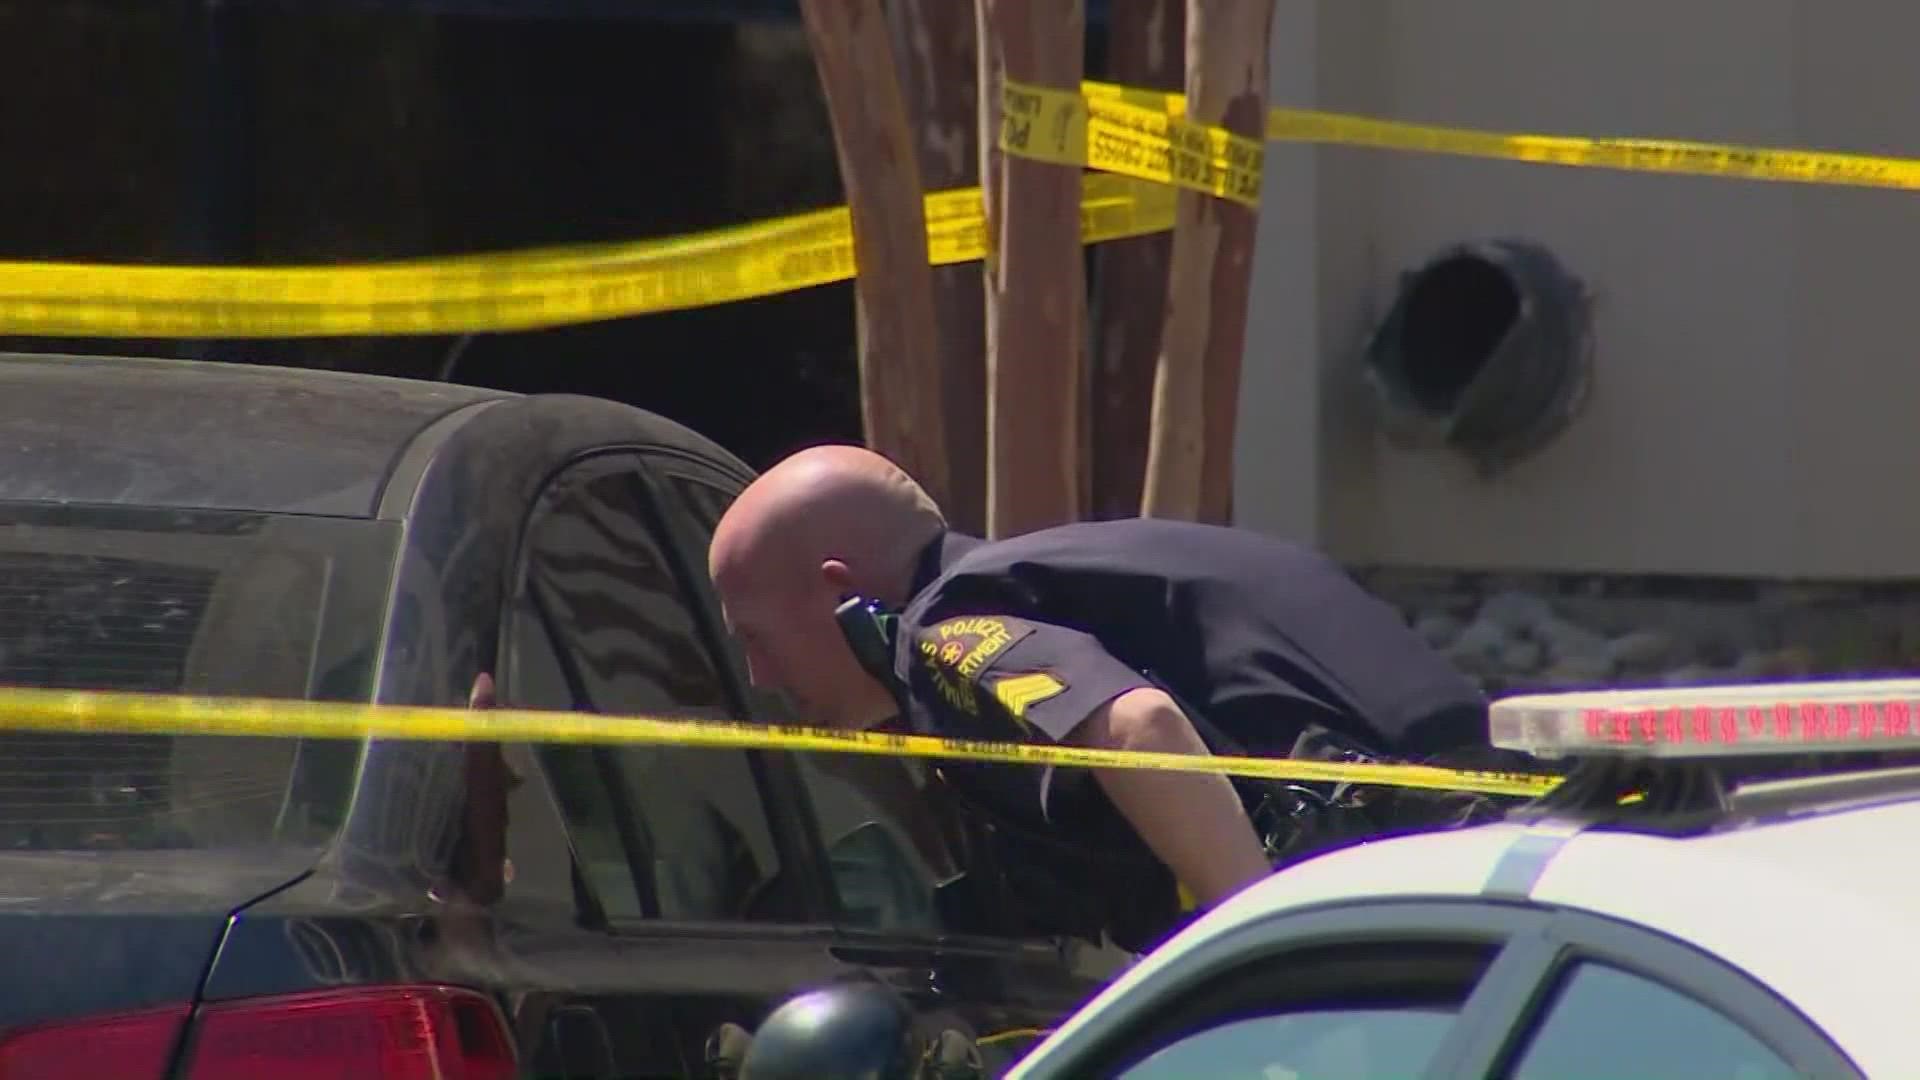 Dallas police are trying to determine how a 3-year-old child was shot and killed.